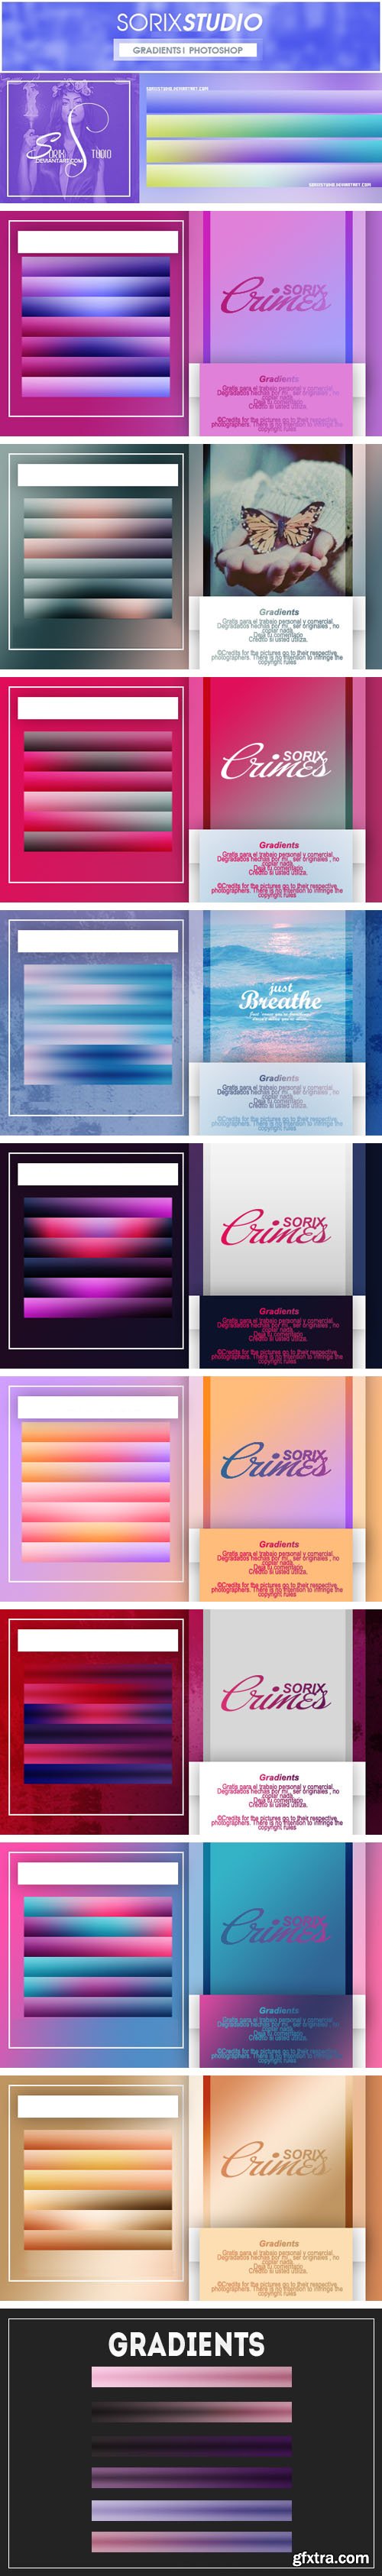 60+ Awesome Gradients Pack for Photoshop